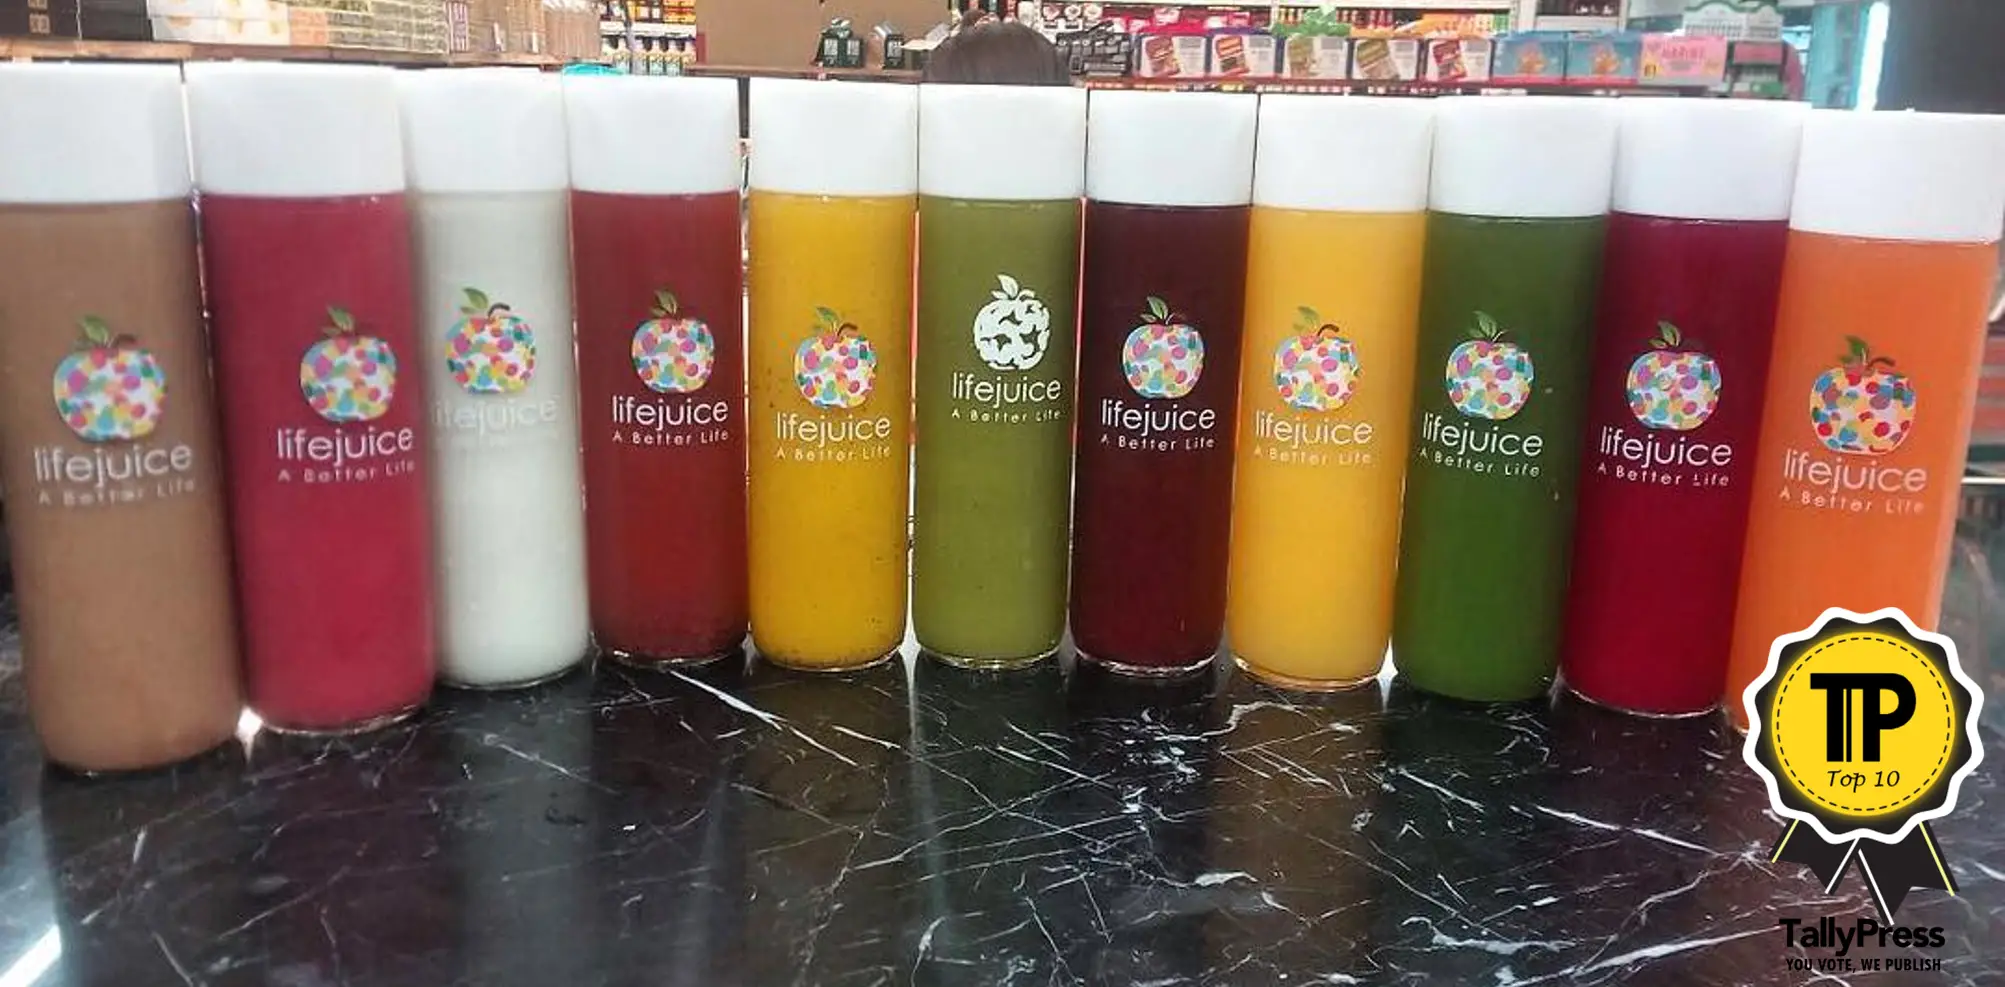 1-lifejuice-co-top-10-best-cold-pressed-juices-in-malaysia-jpg